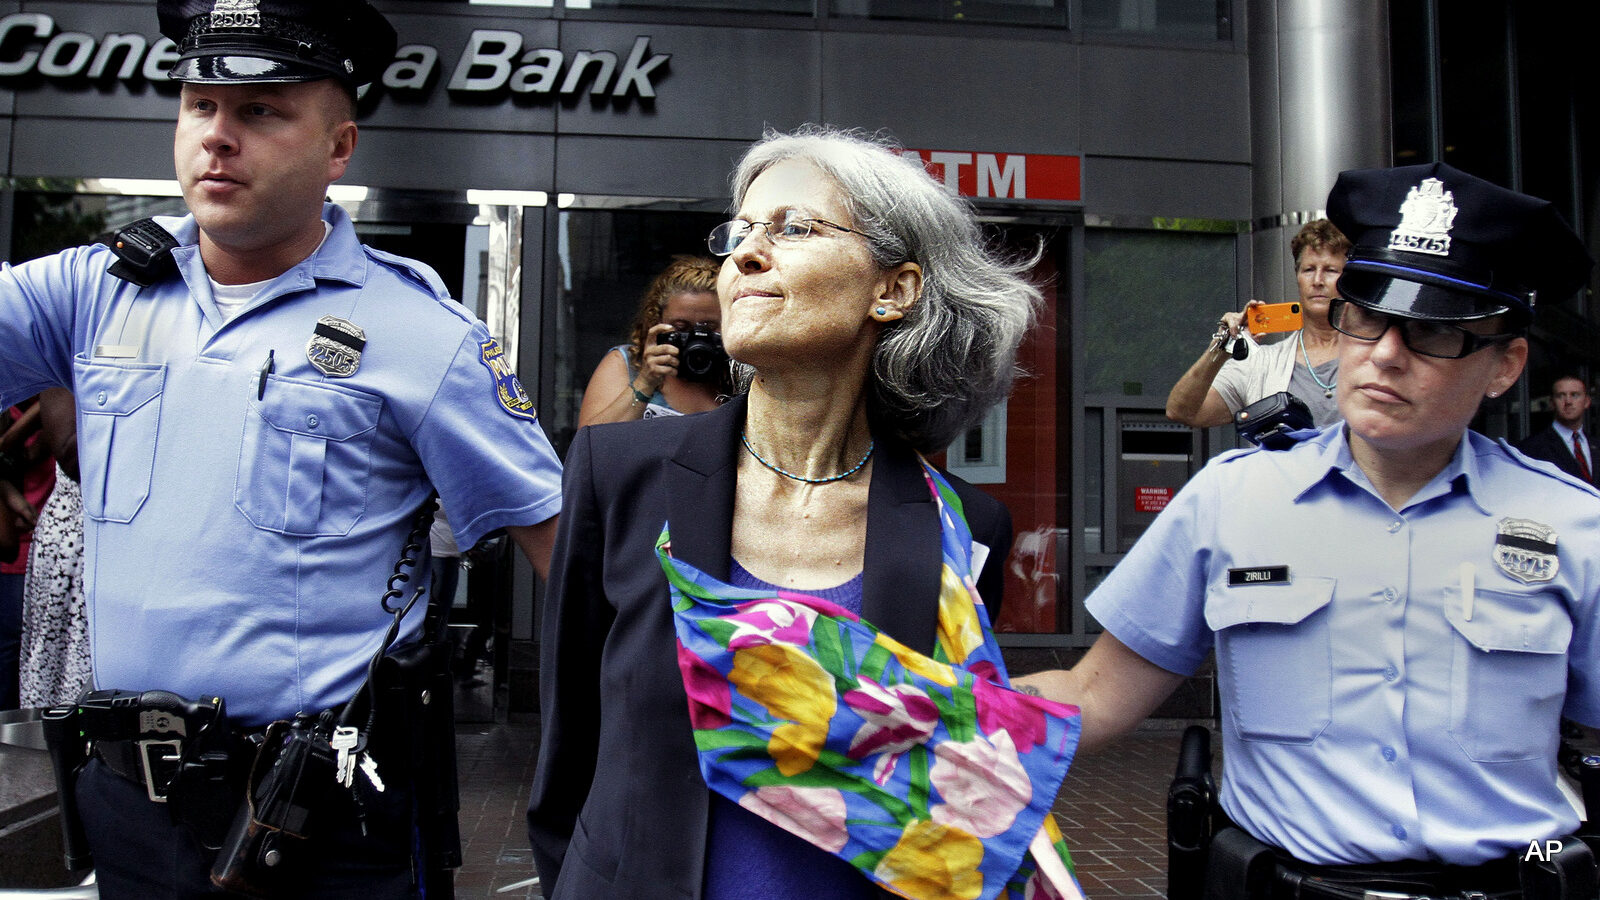 Green Party presidential nominee Jill Stein, is transported in restraints to be arrested after a sit-in at a downtown Philadelphia bank over housing foreclosures.